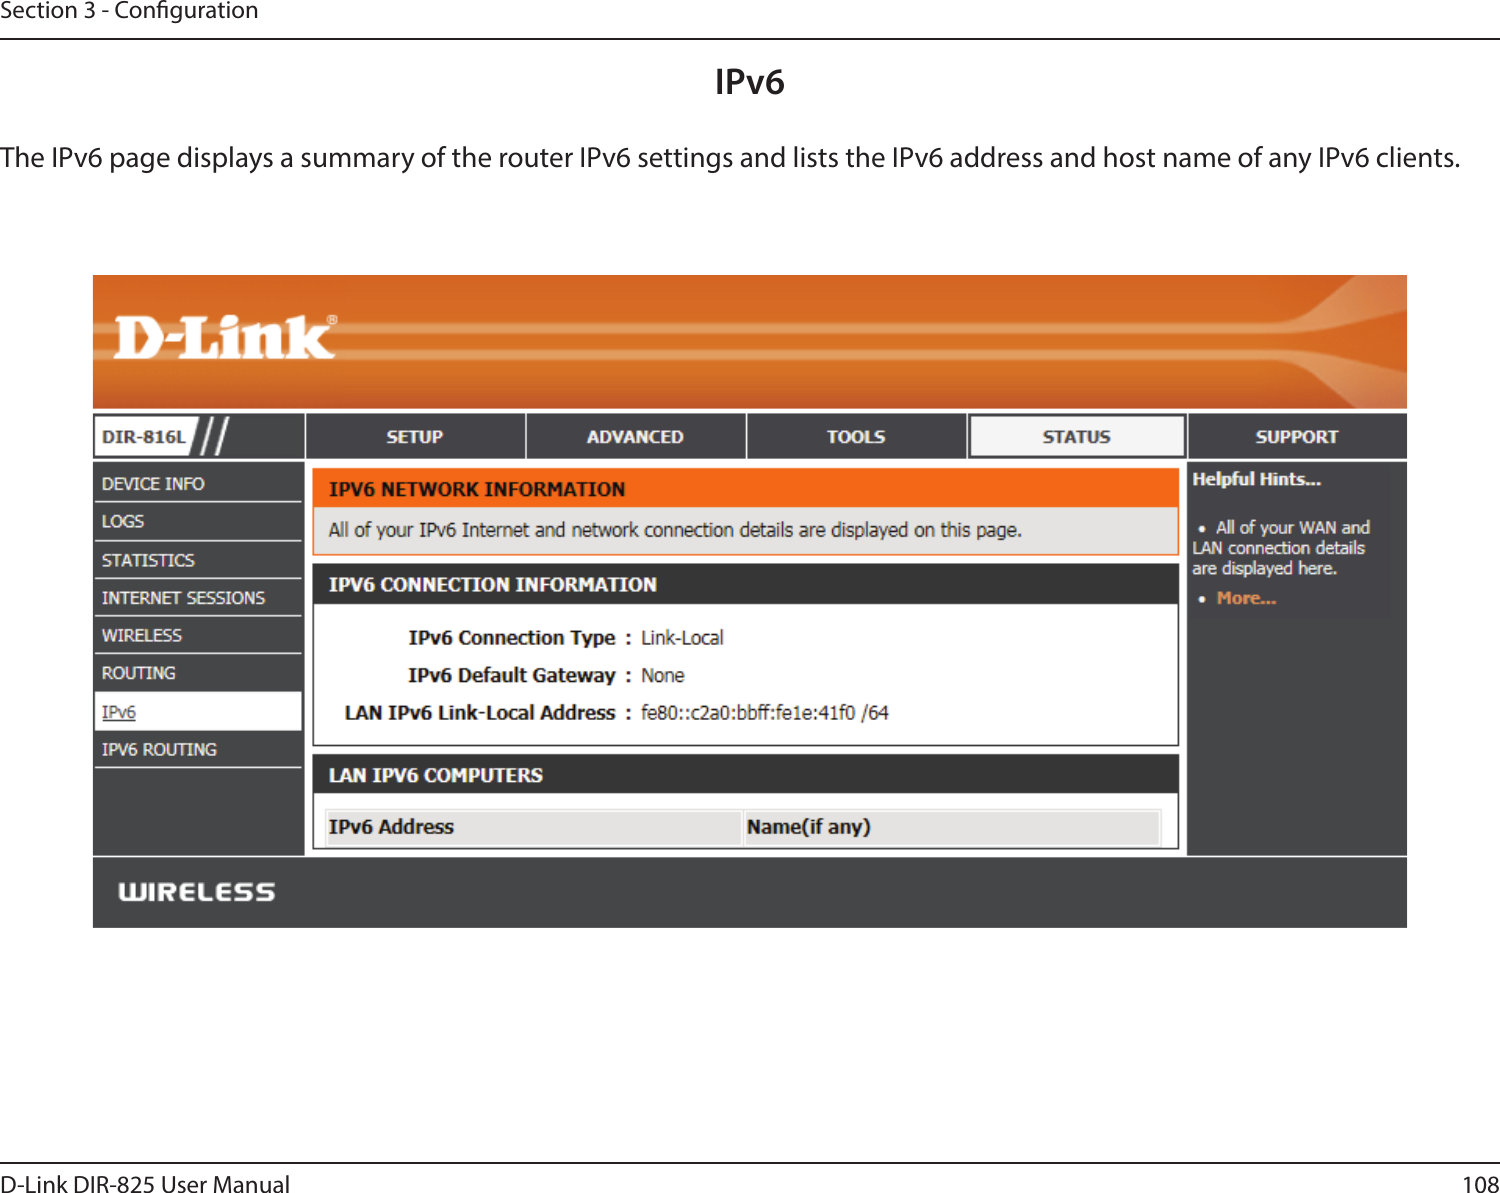 108D-Link DIR-825 User ManualSection 3 - CongurationIPv6The IPv6 page displays a summary of the router IPv6 settings and lists the IPv6 address and host name of any IPv6 clients. 